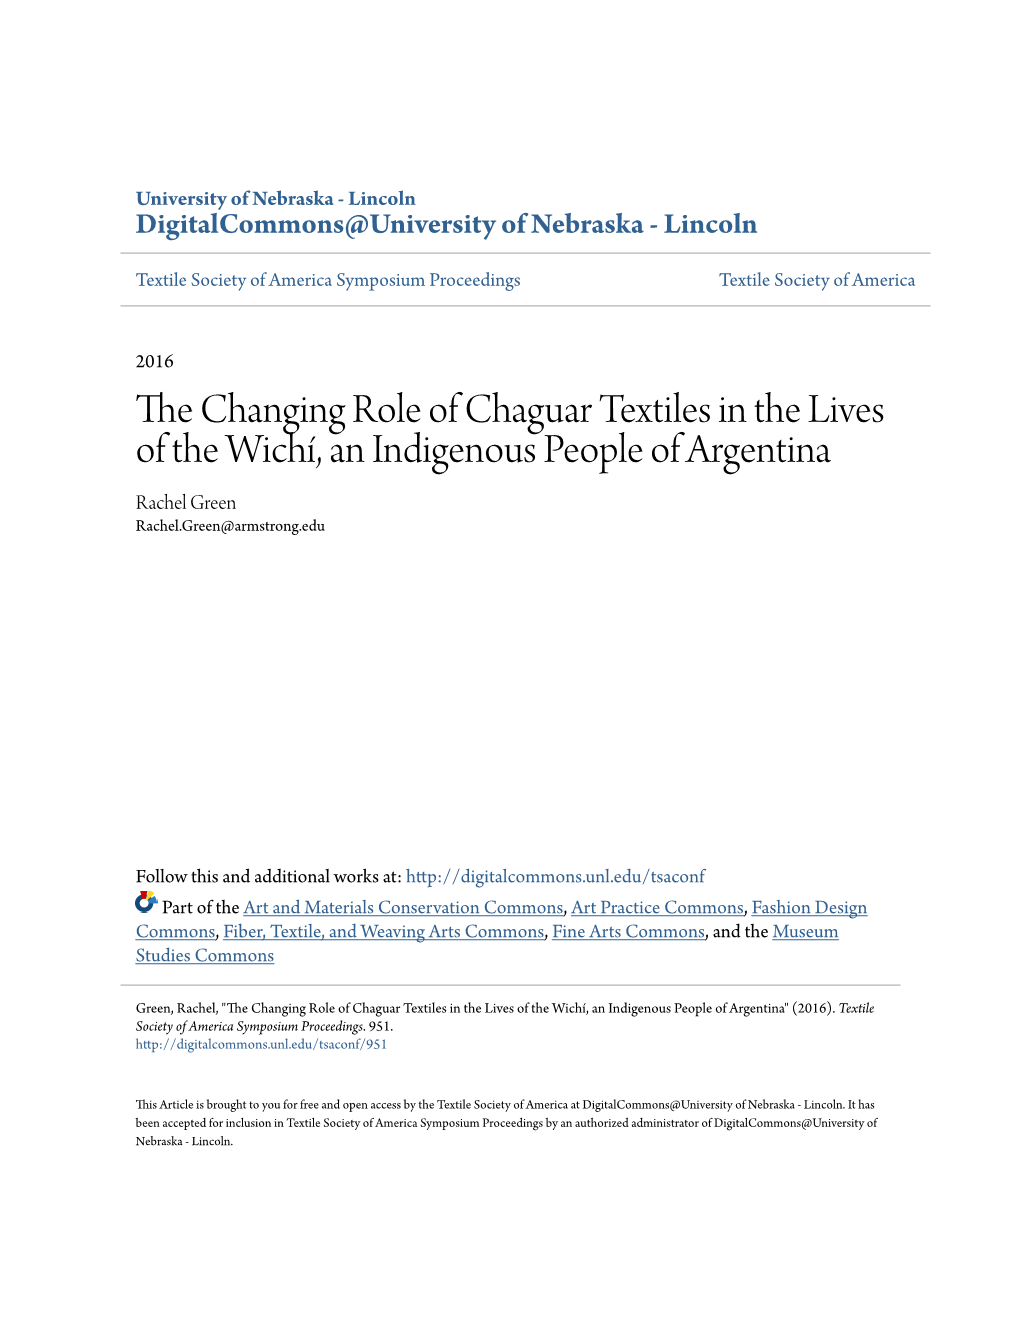 The Changing Role of Chaguar Textiles in the Lives of the Wichí, an Indigenous People of Argentina